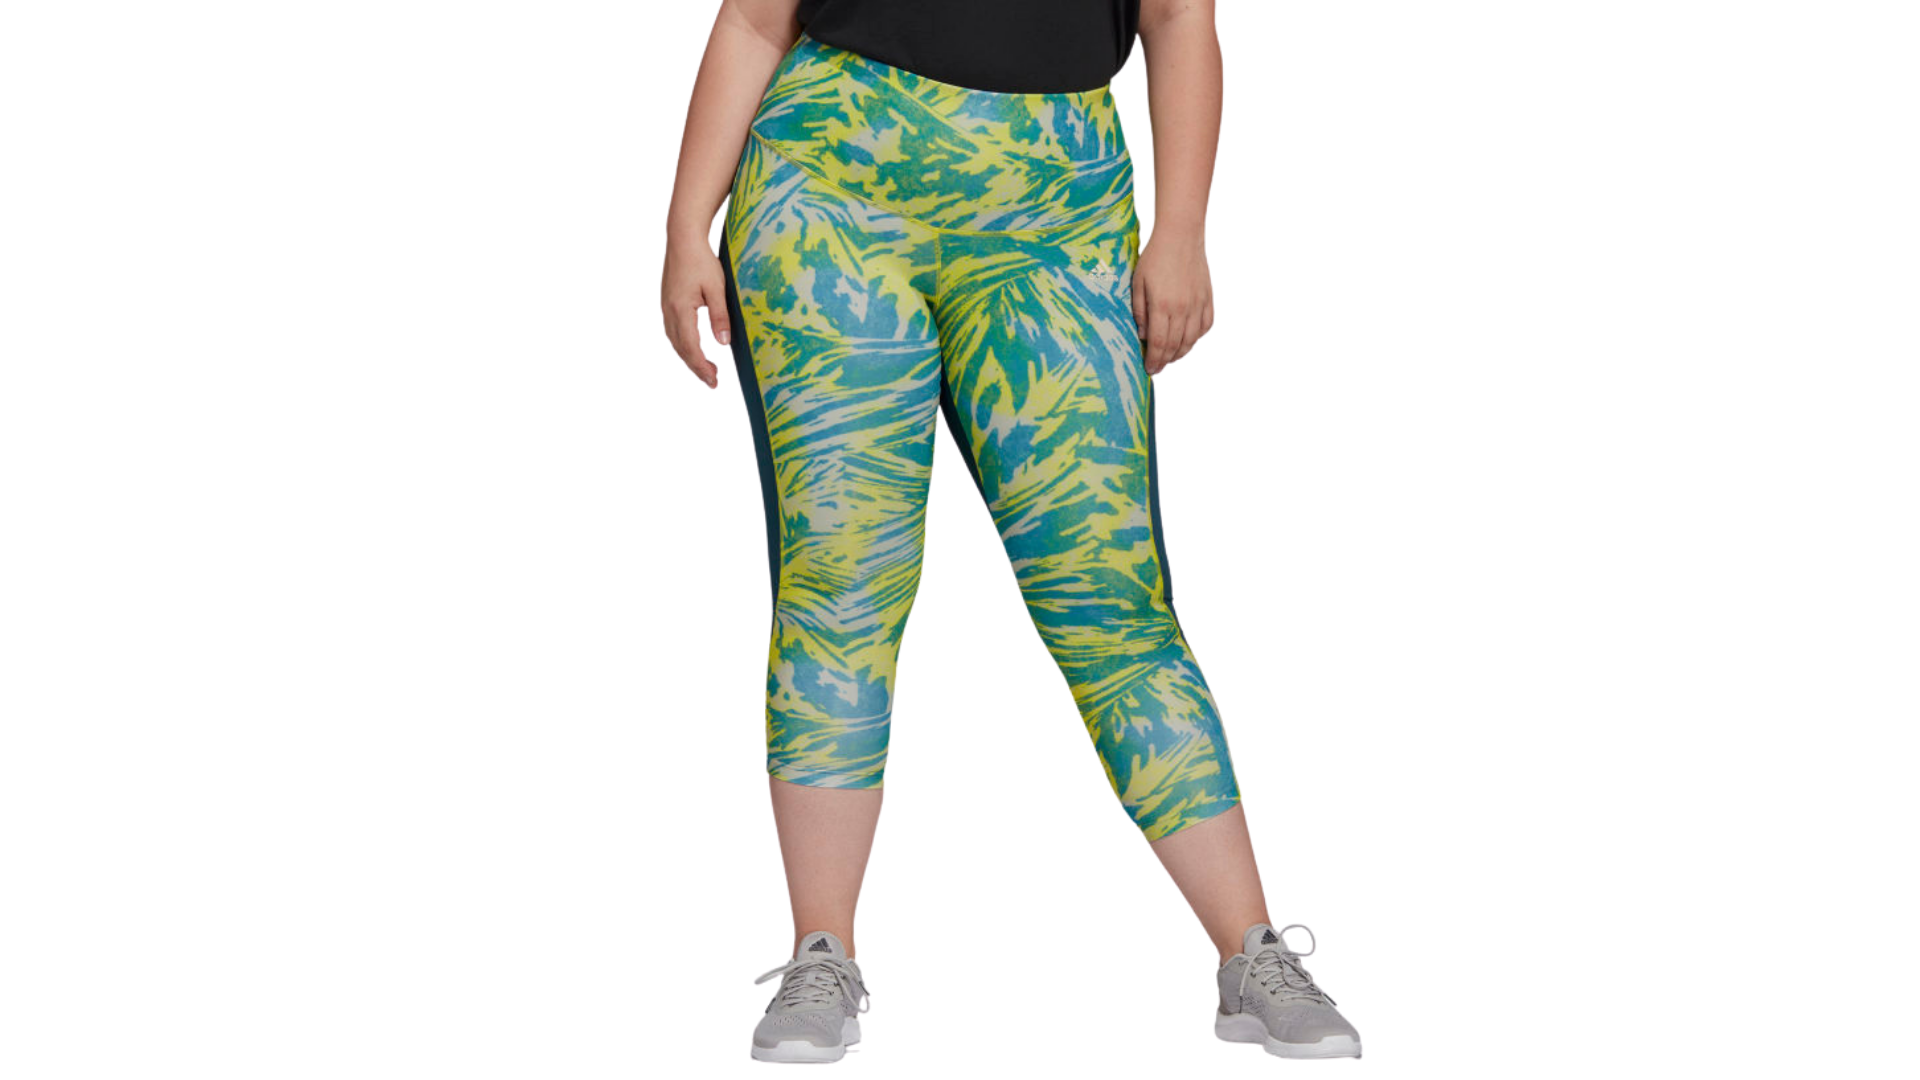 Adidas best plus size leggings with pockets